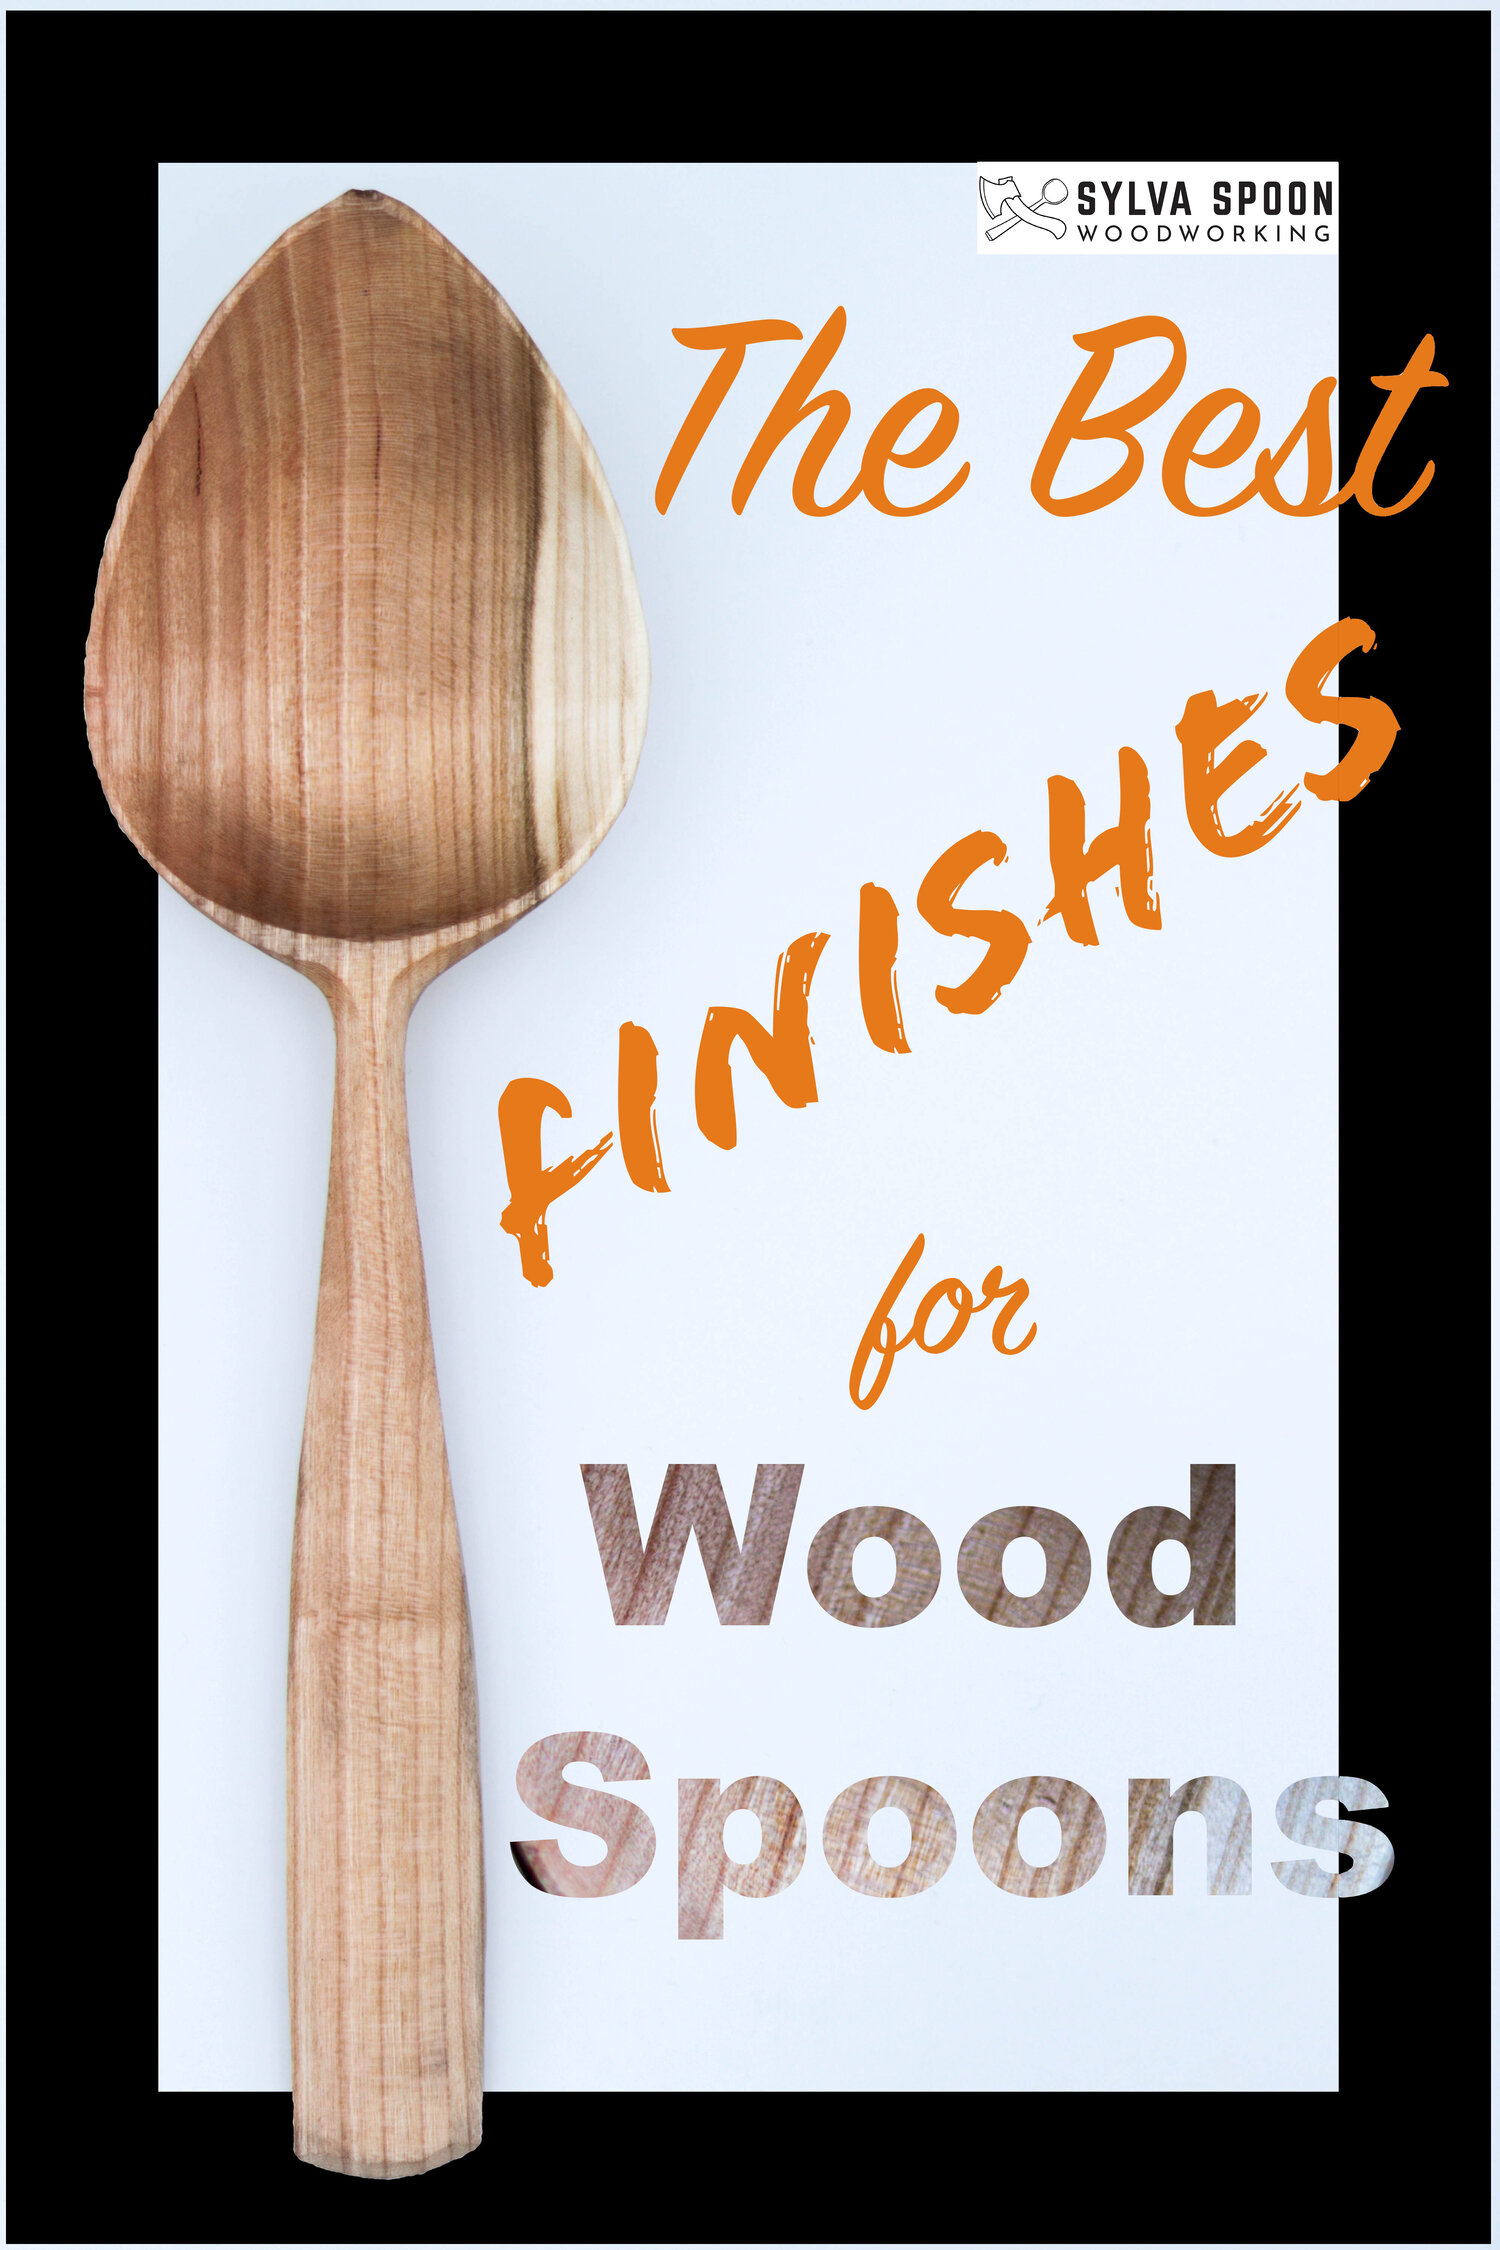 How to Clean a Smelly Wooden Spoon